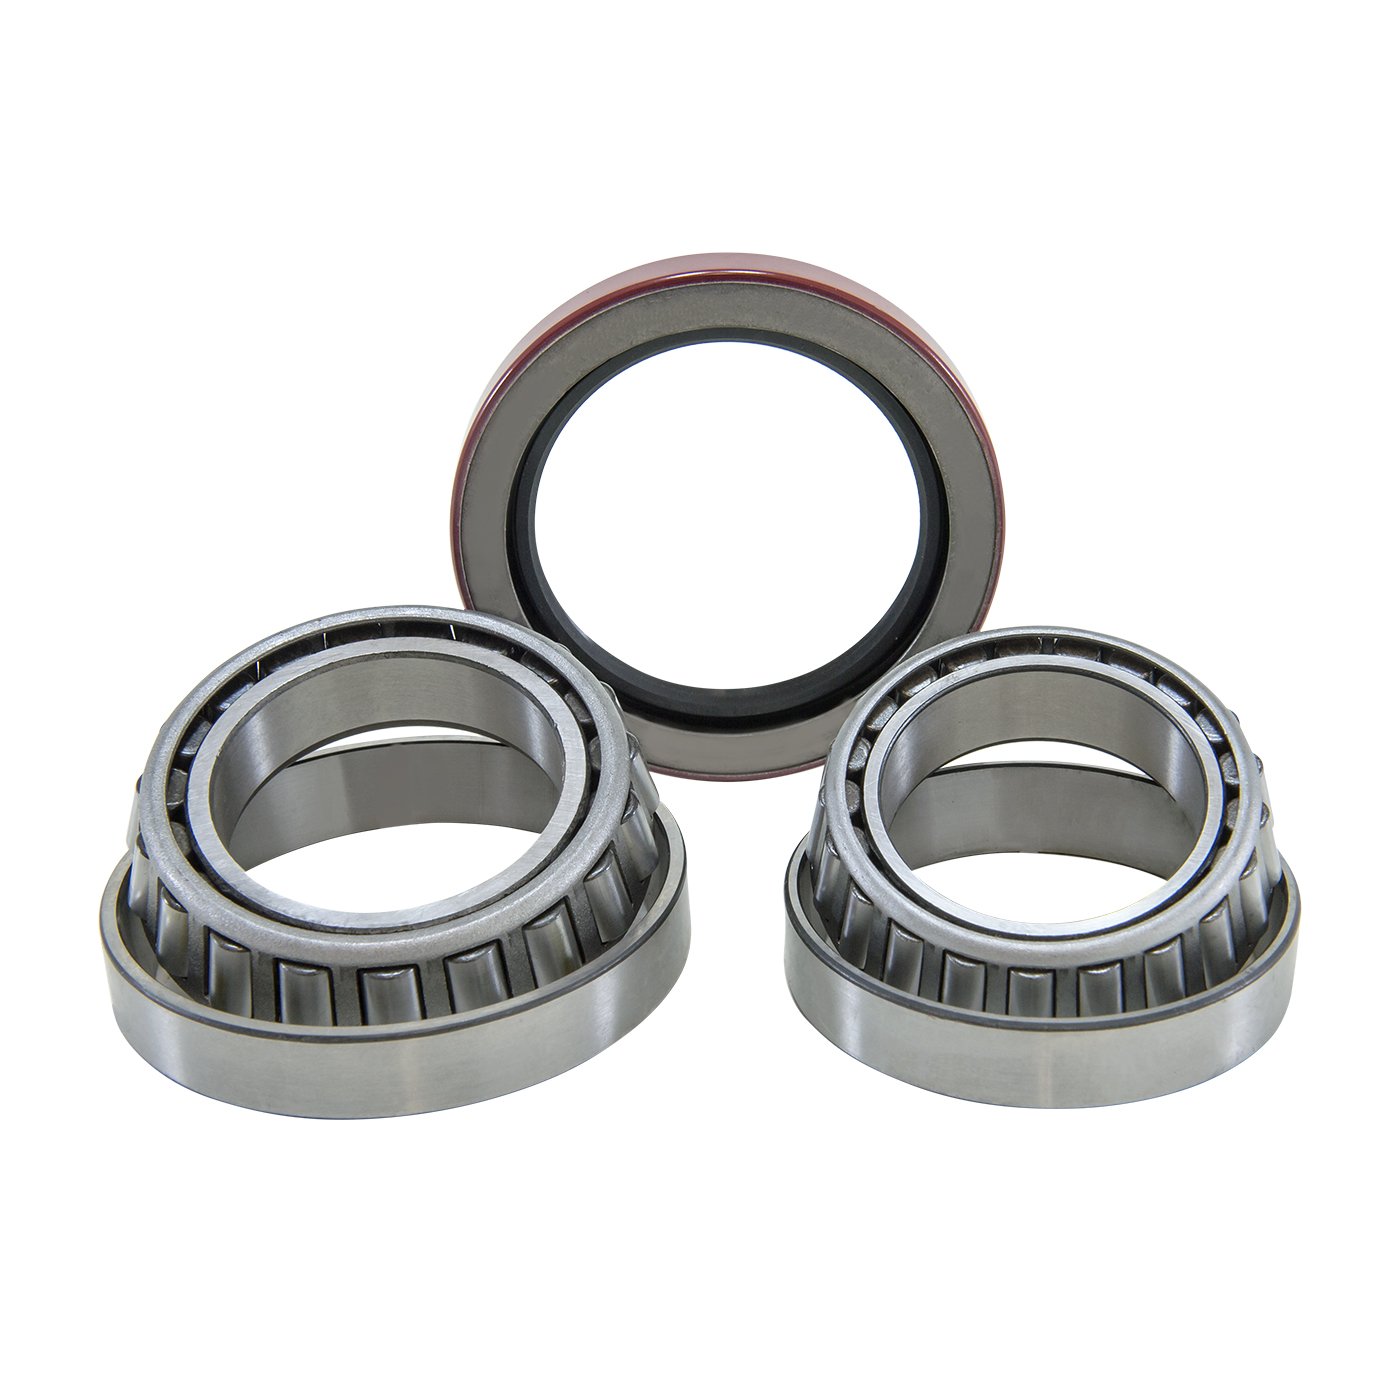 Axle bearing / seal kit for 11 / up GM 11.5 AAM rear